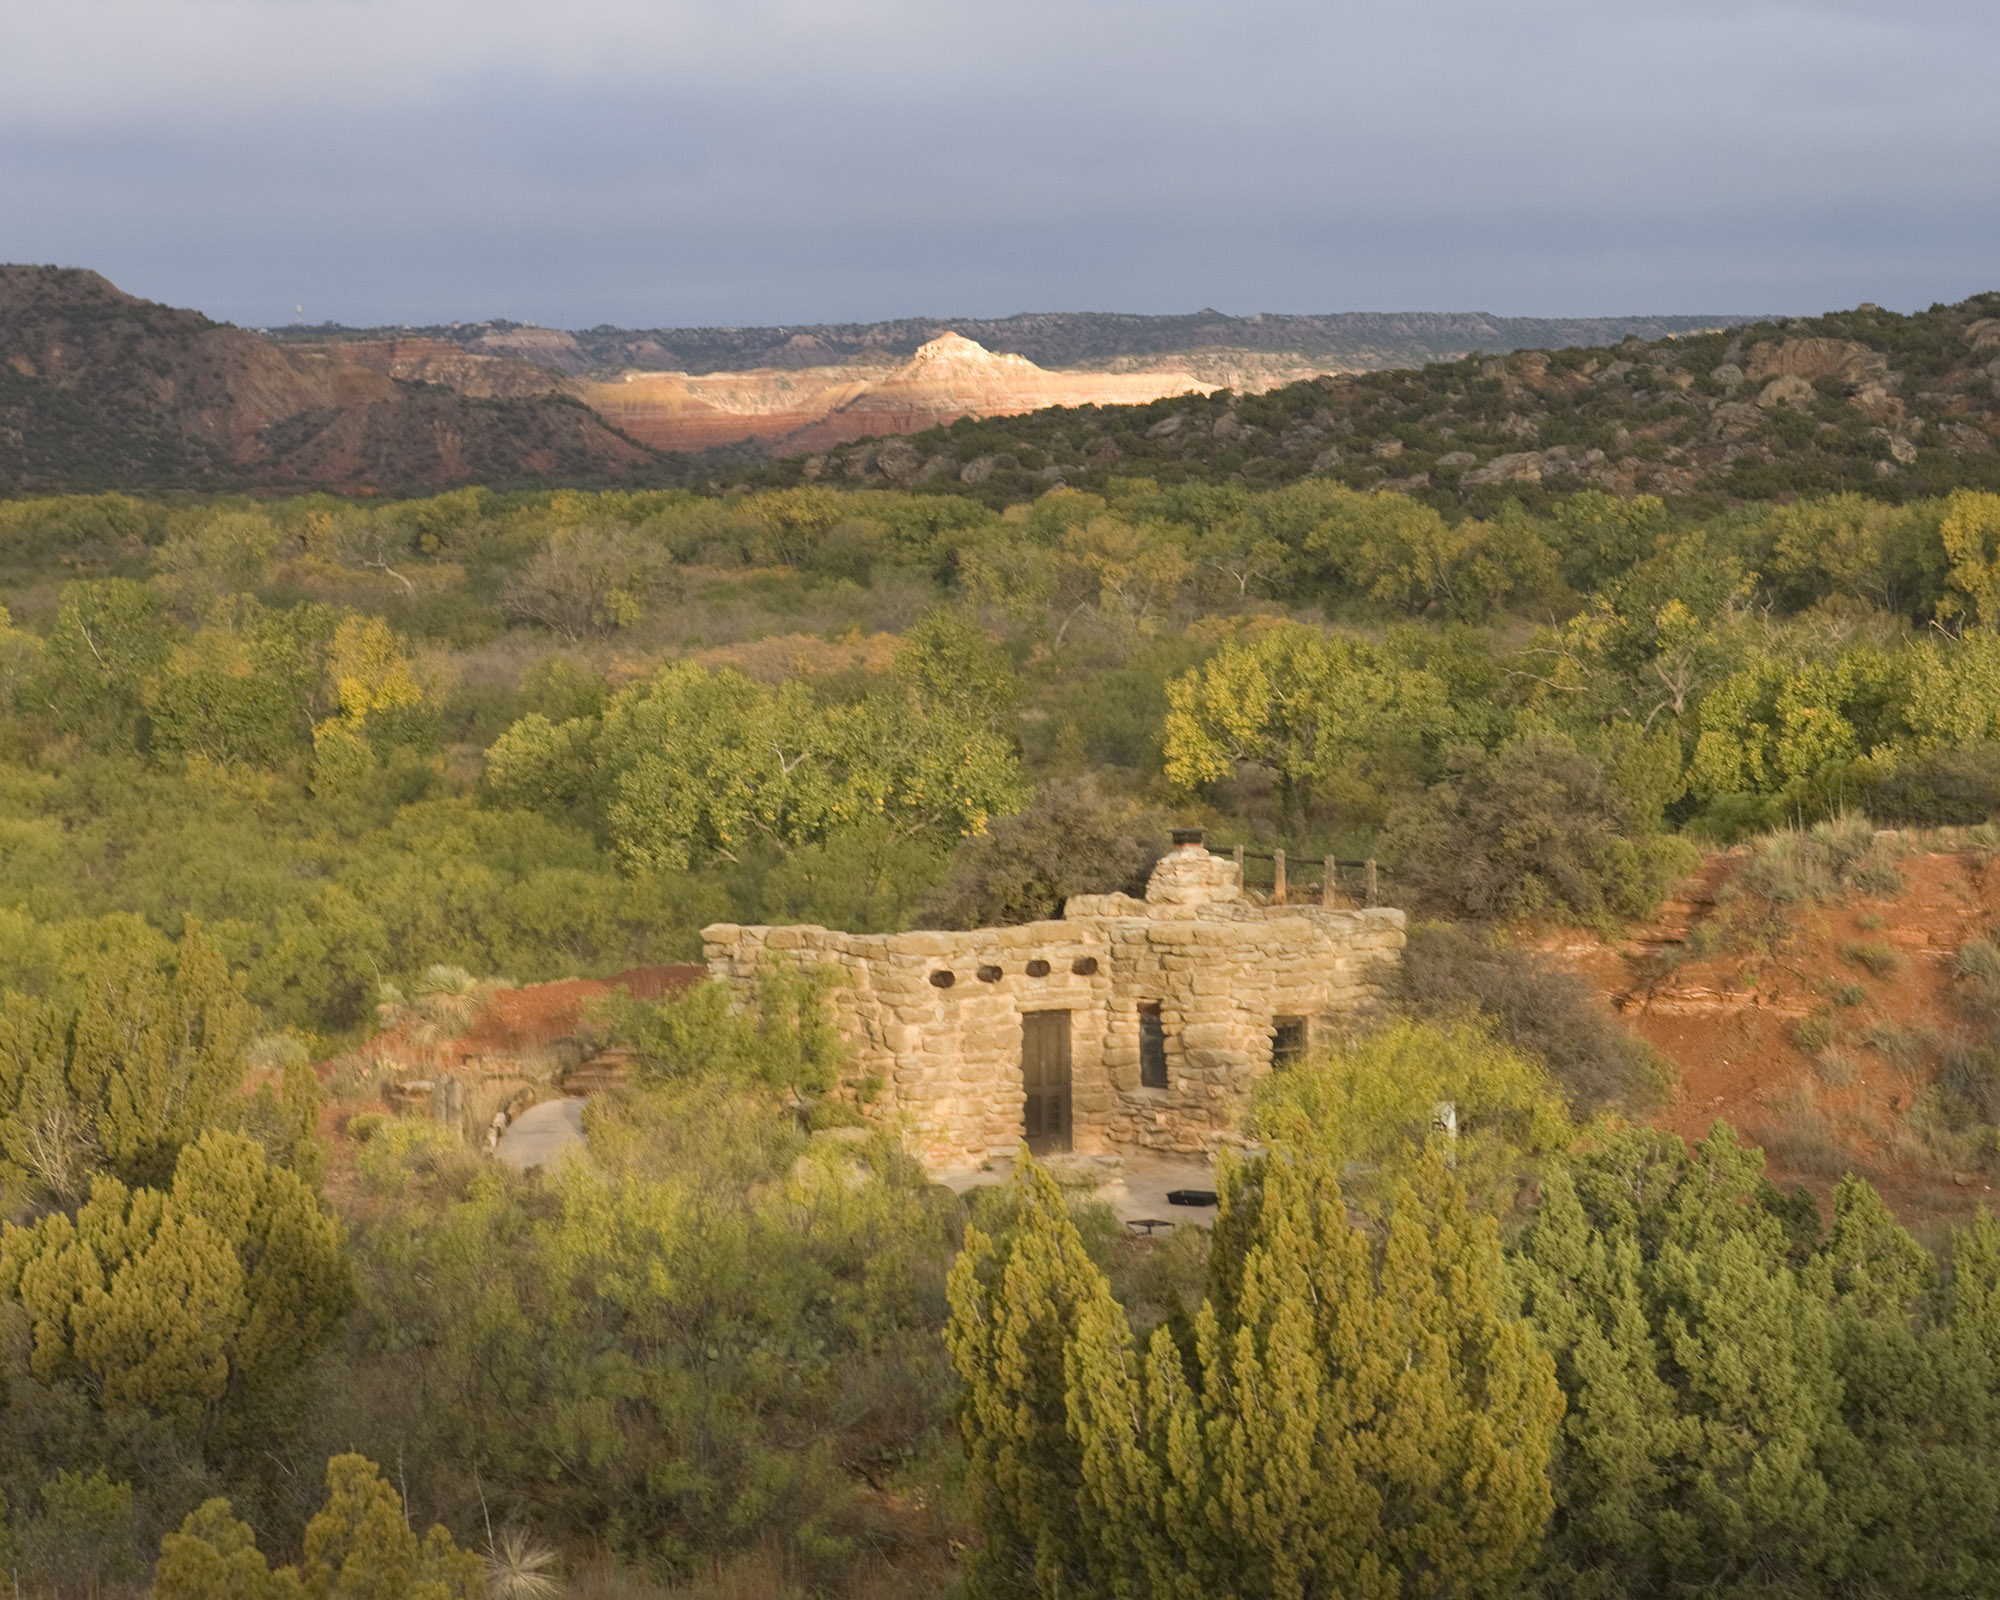 Palo Duro Canyon State Park, Image by Earl Nottingham, © Texas Parks and Wildlife Department